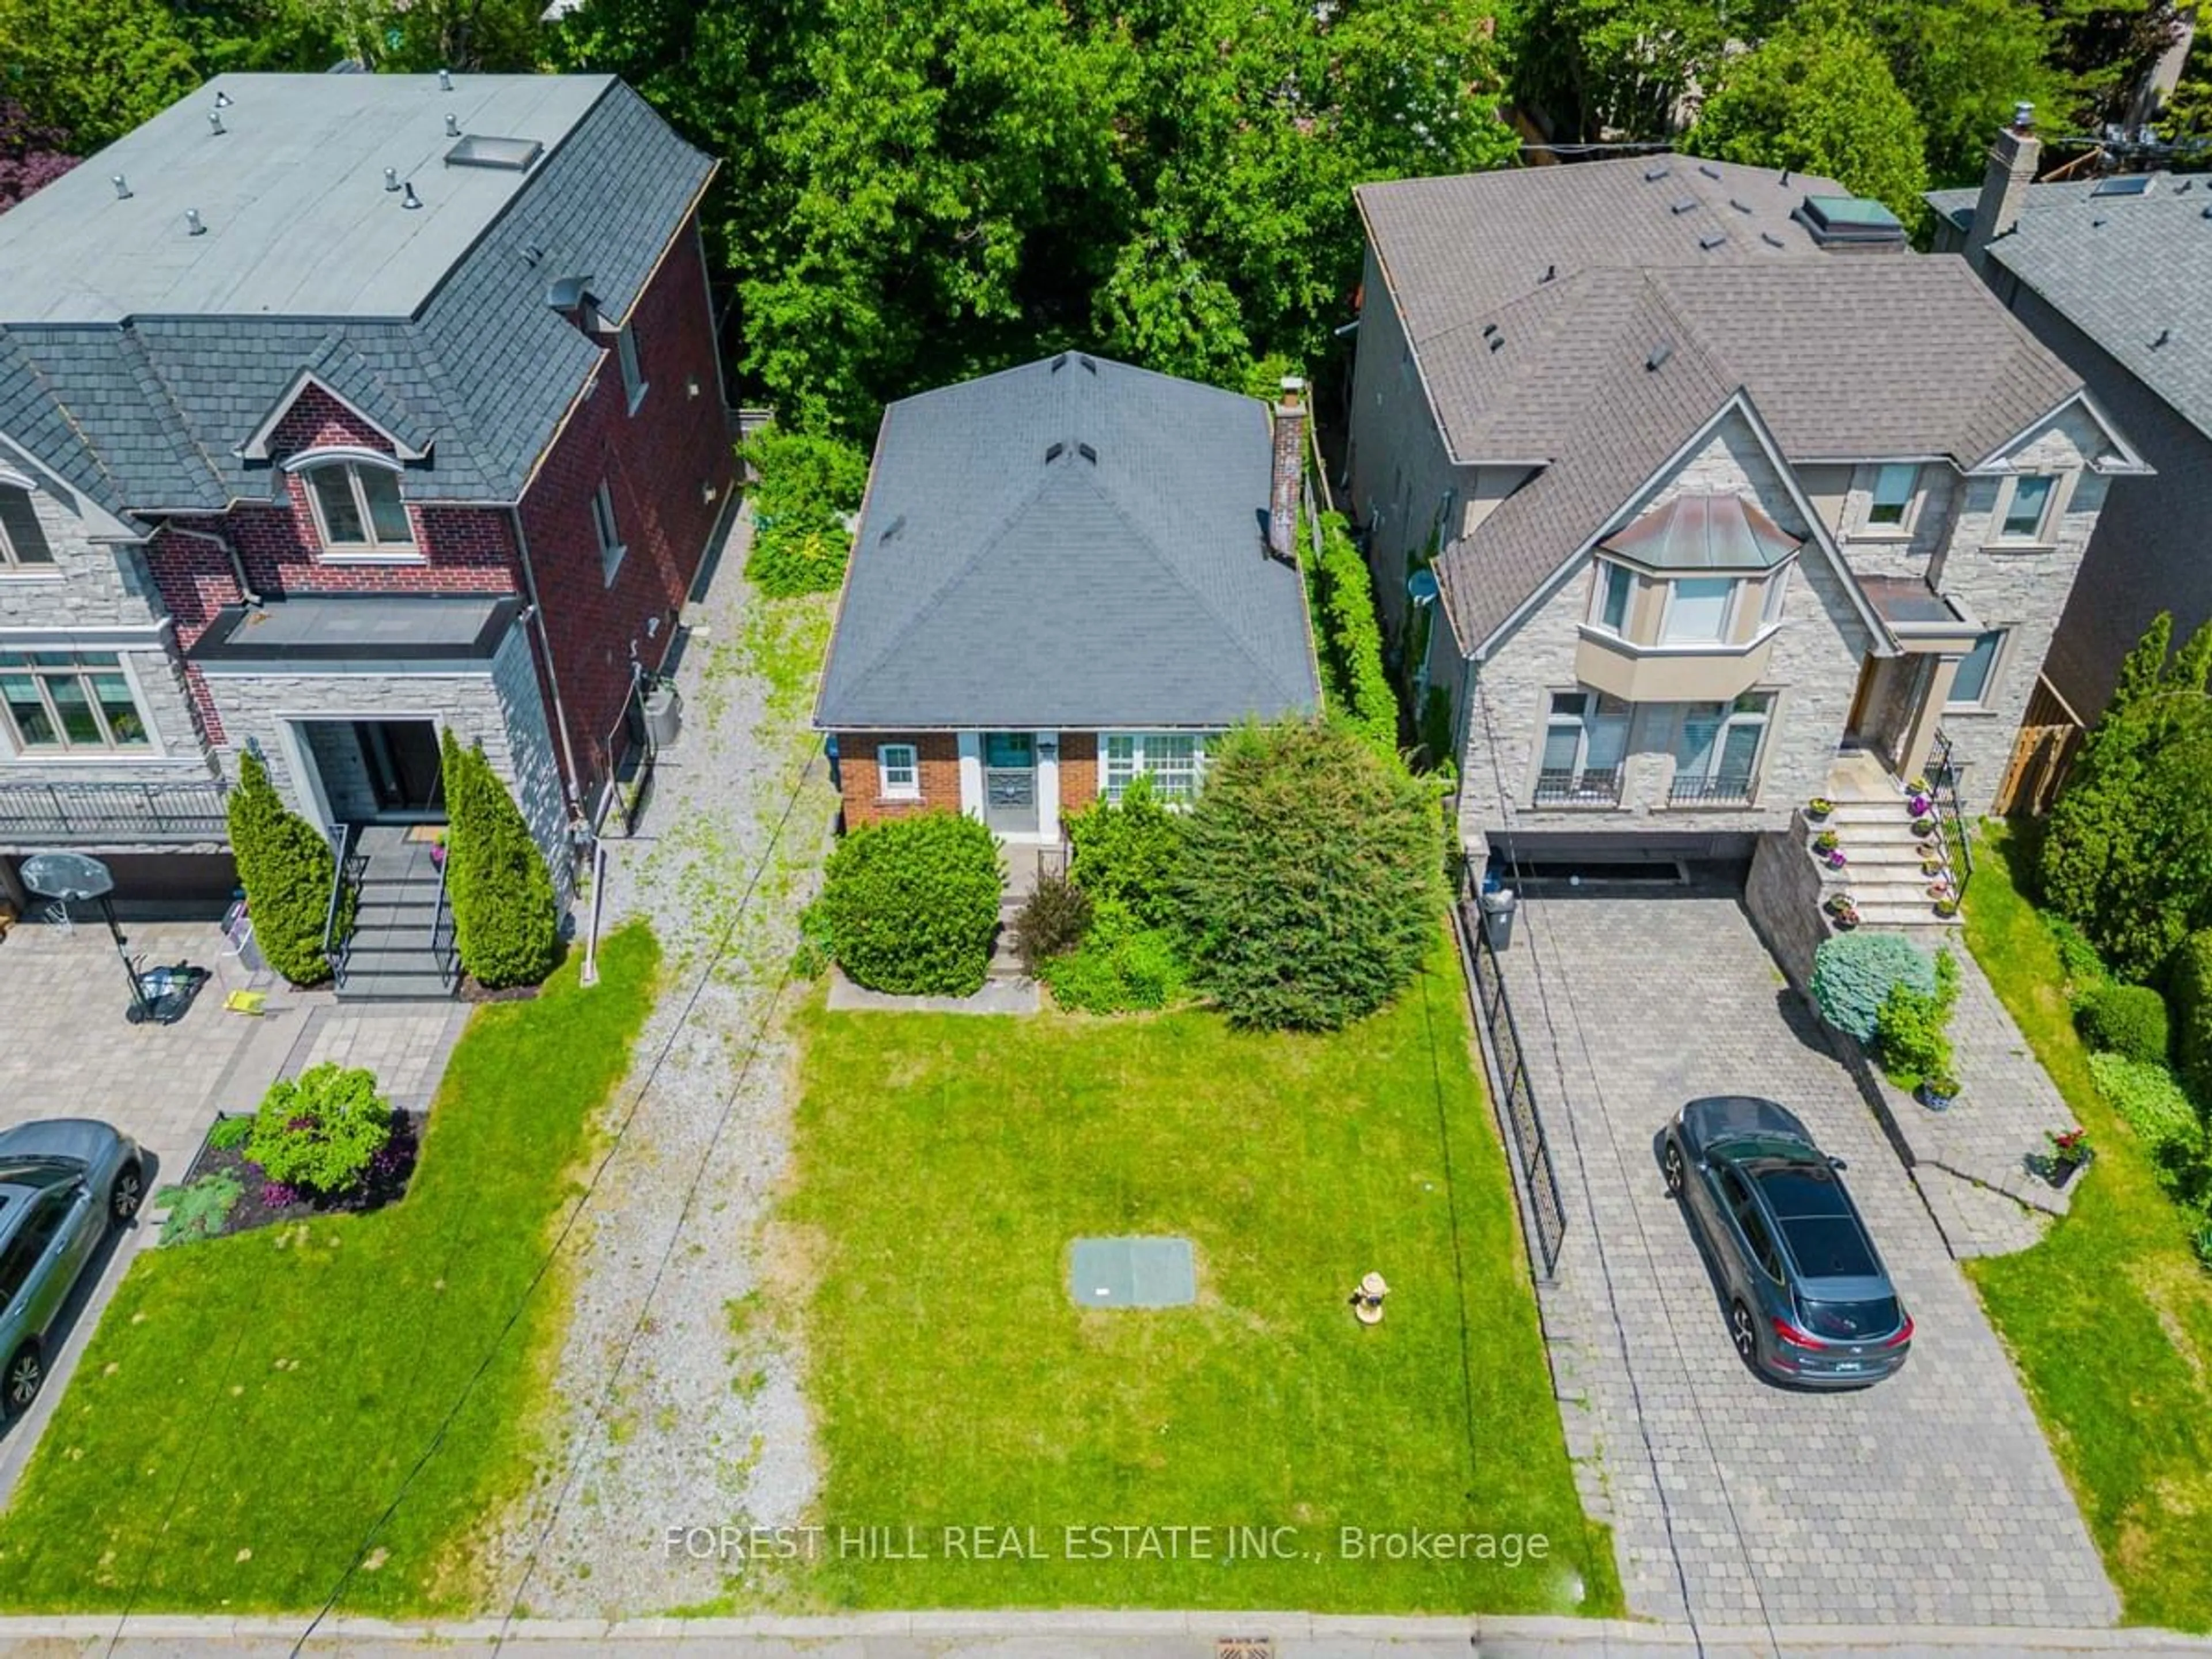 Frontside or backside of a home for 414 Douglas Ave, Toronto Ontario M5M 1H4